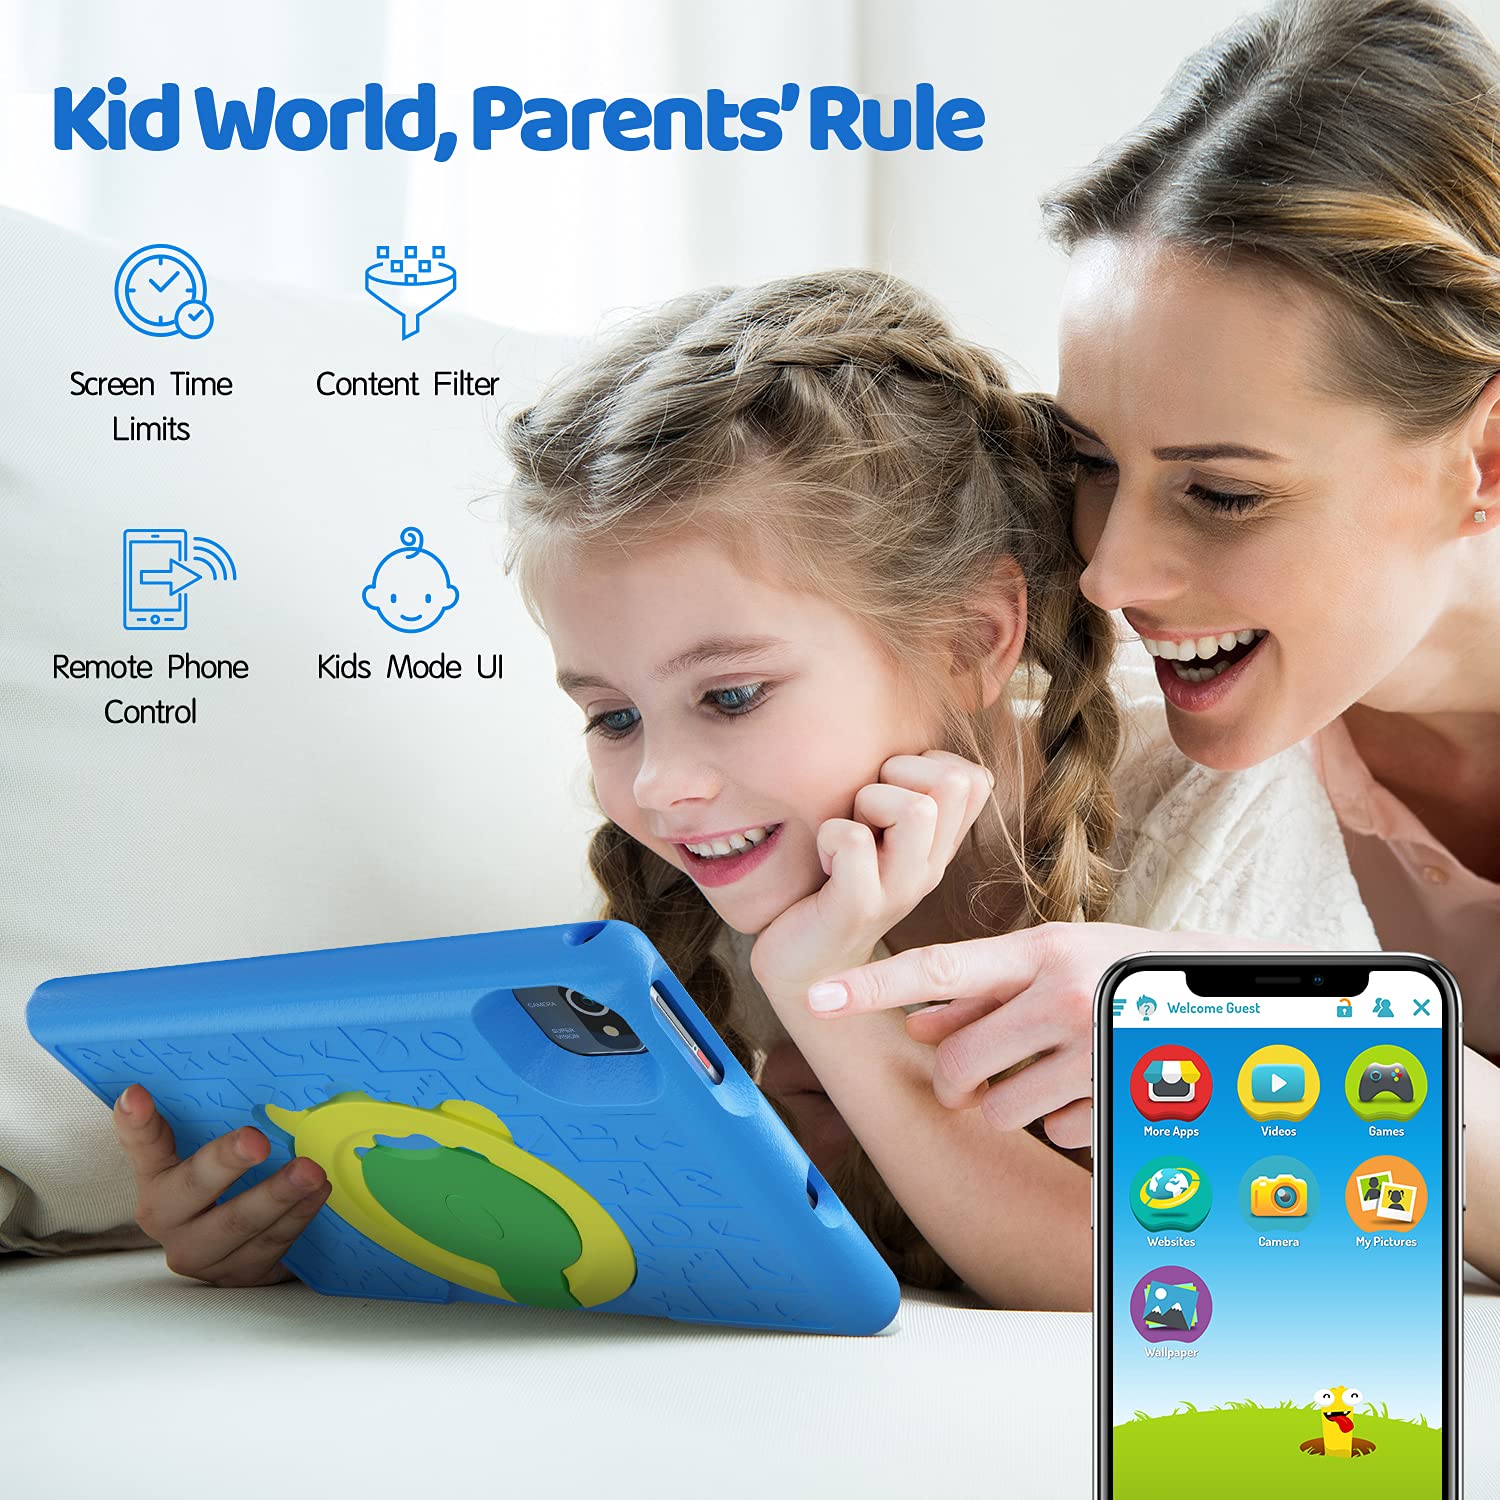 Kids Tablet 10 inch Tablet for Kids -Android 10 Tablet PC 10.1" Display, 5000mAh, Kidoz Pre Installed, Parental Control, 32GB ROM, Quad Core Processor, Wi-Fi, Bluetooth, Kid-Proof Case, Blue